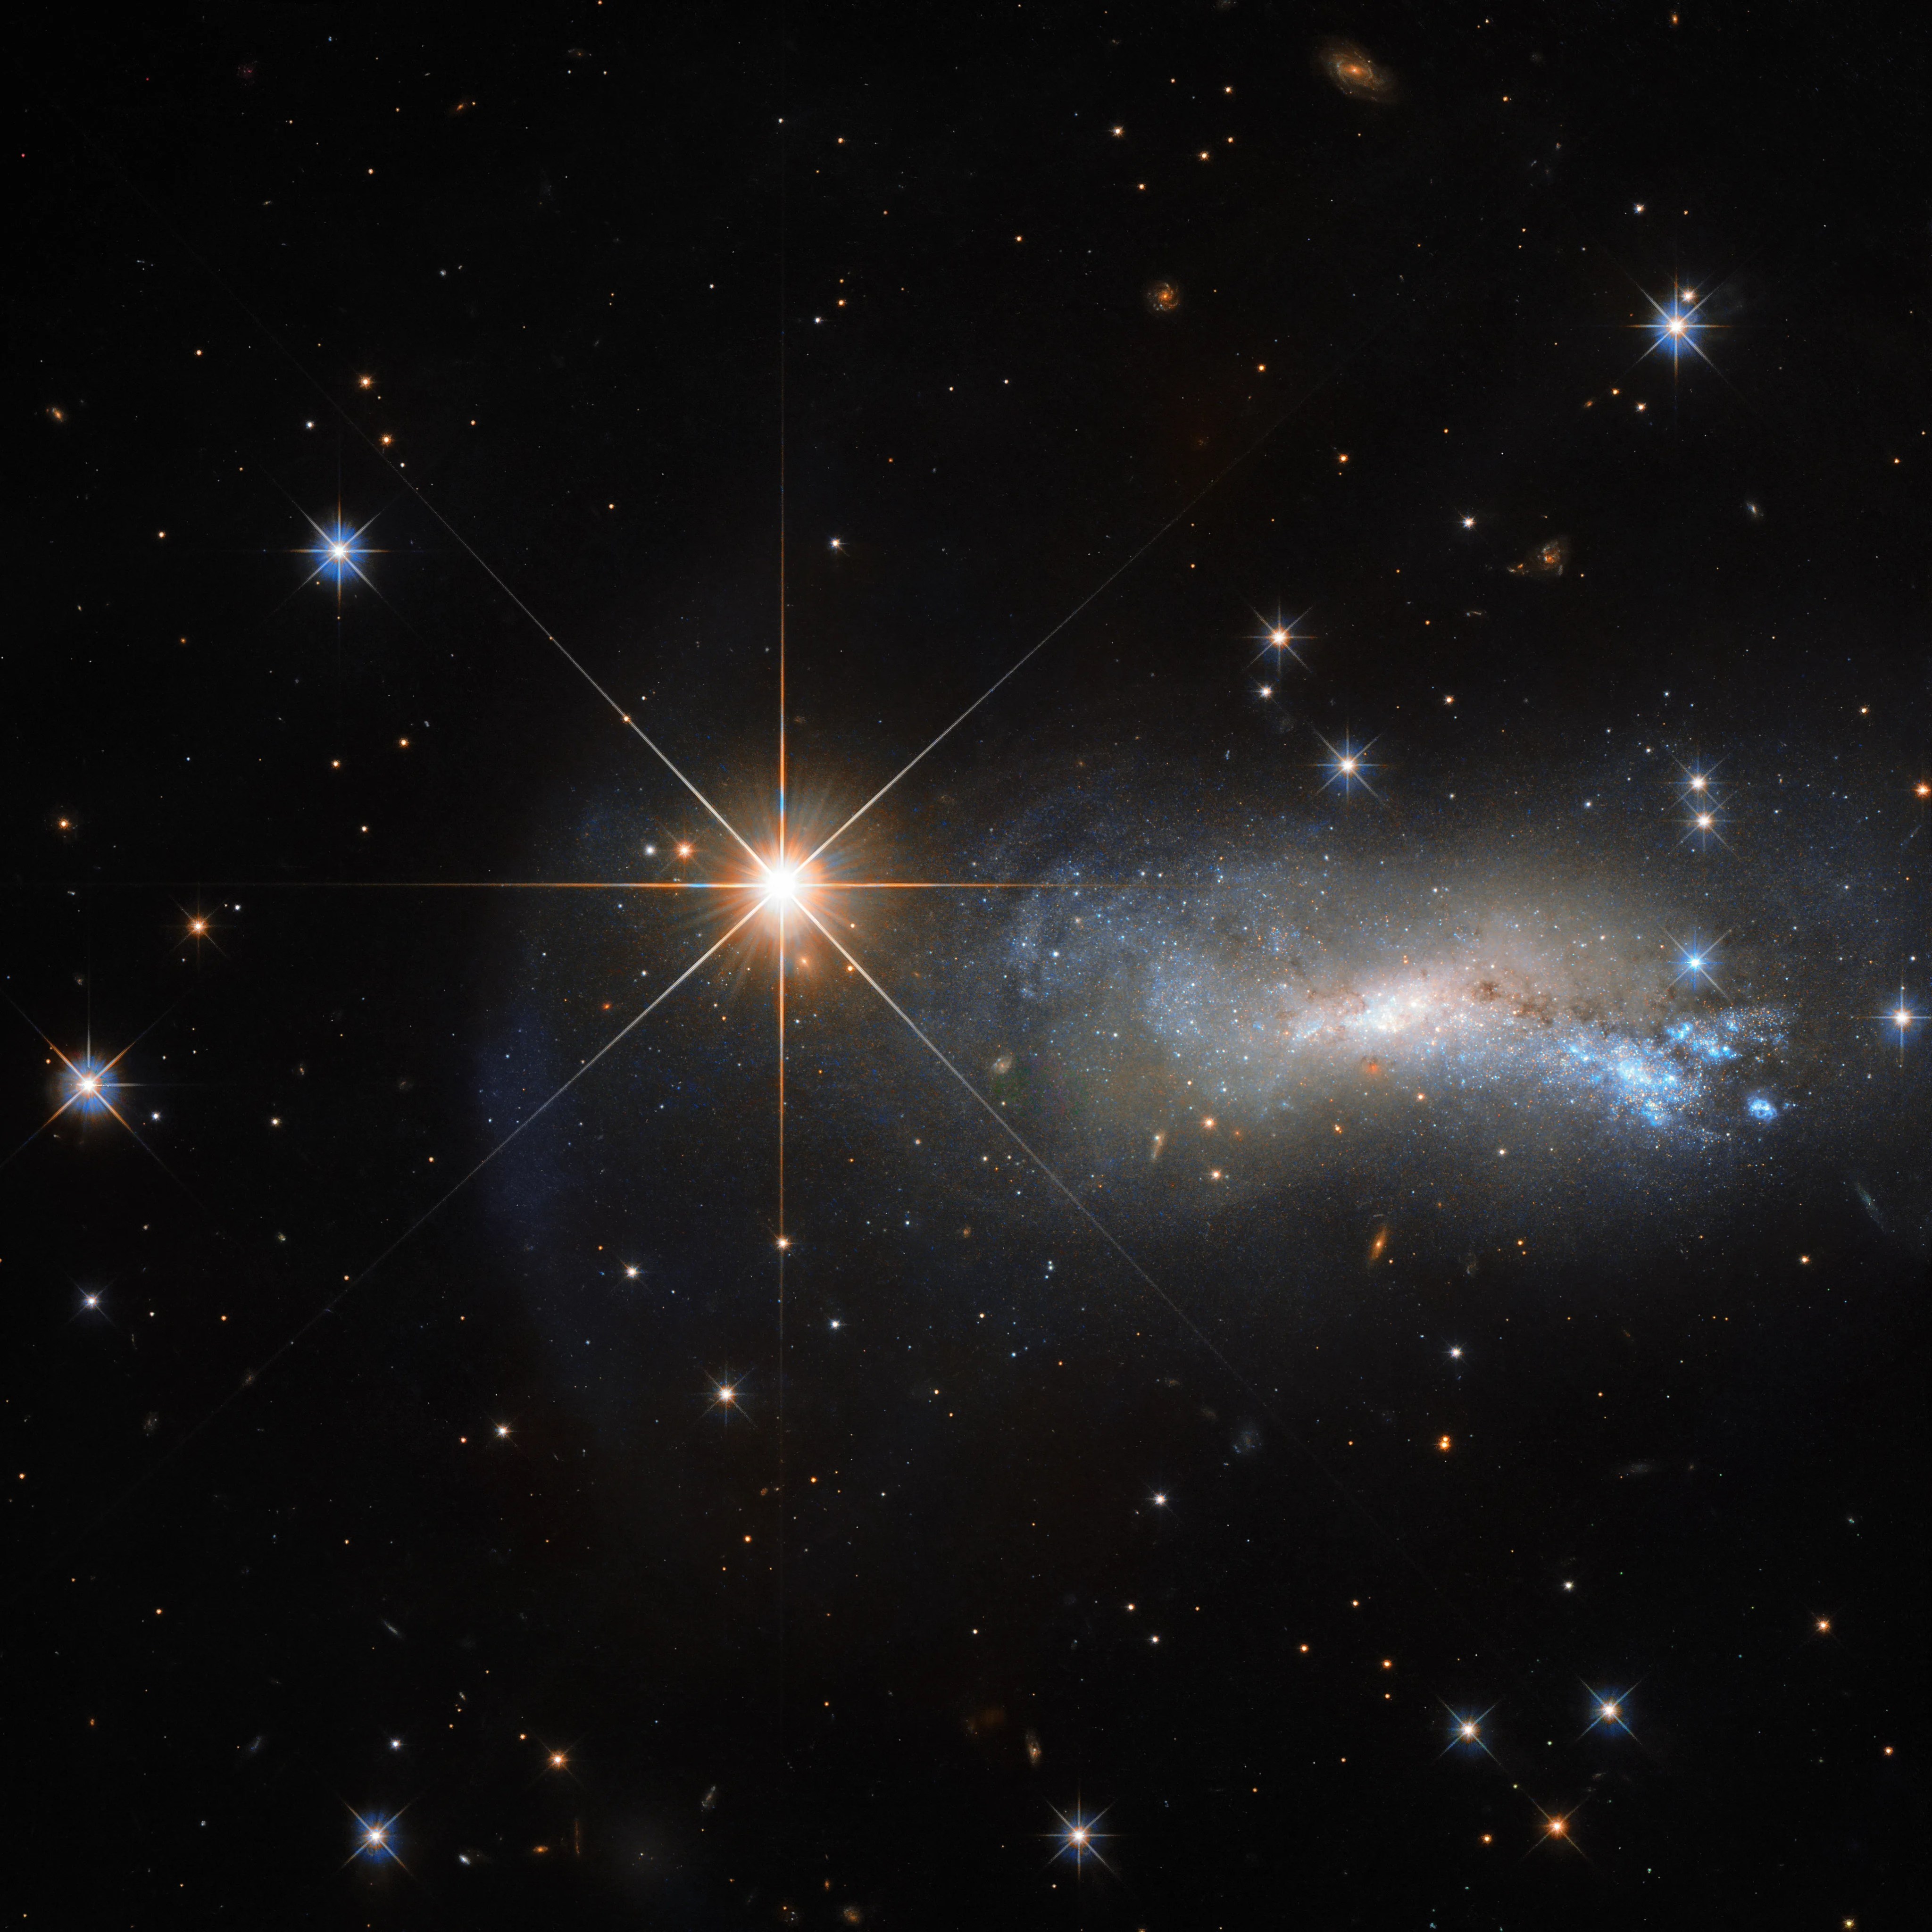 Hubble image of a star and galaxy in lacerta